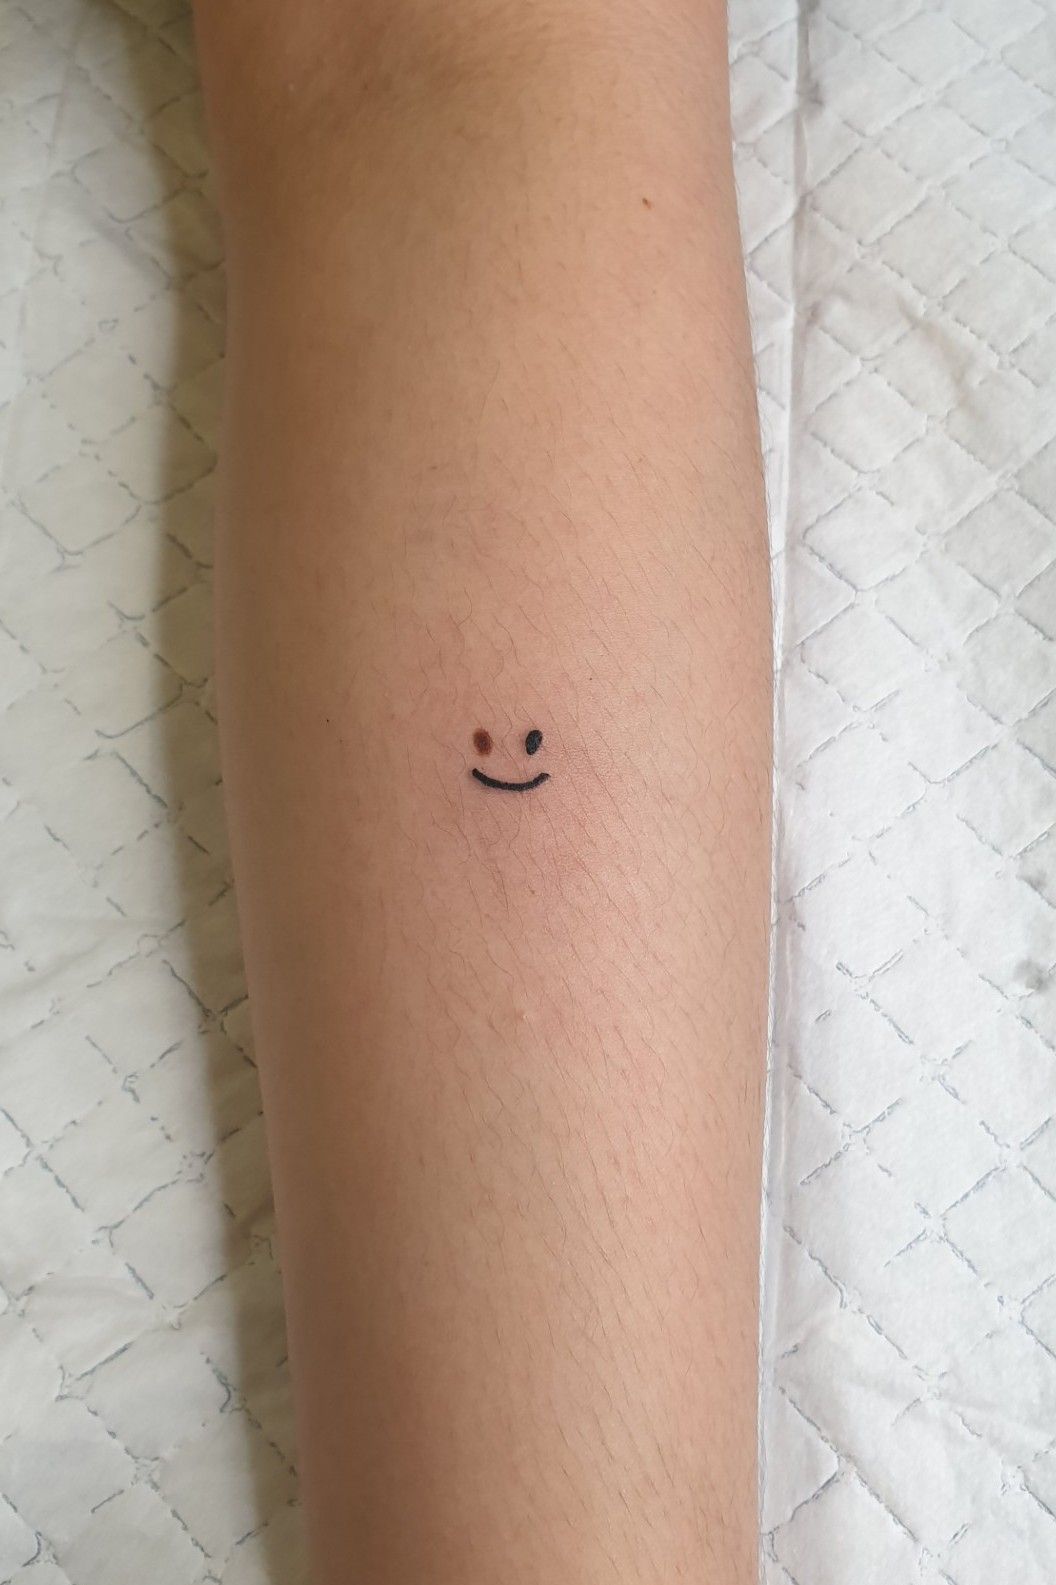 19 Small Tattoos If You Only Kind Of Want To Be Edgy  Lets Eat Cake